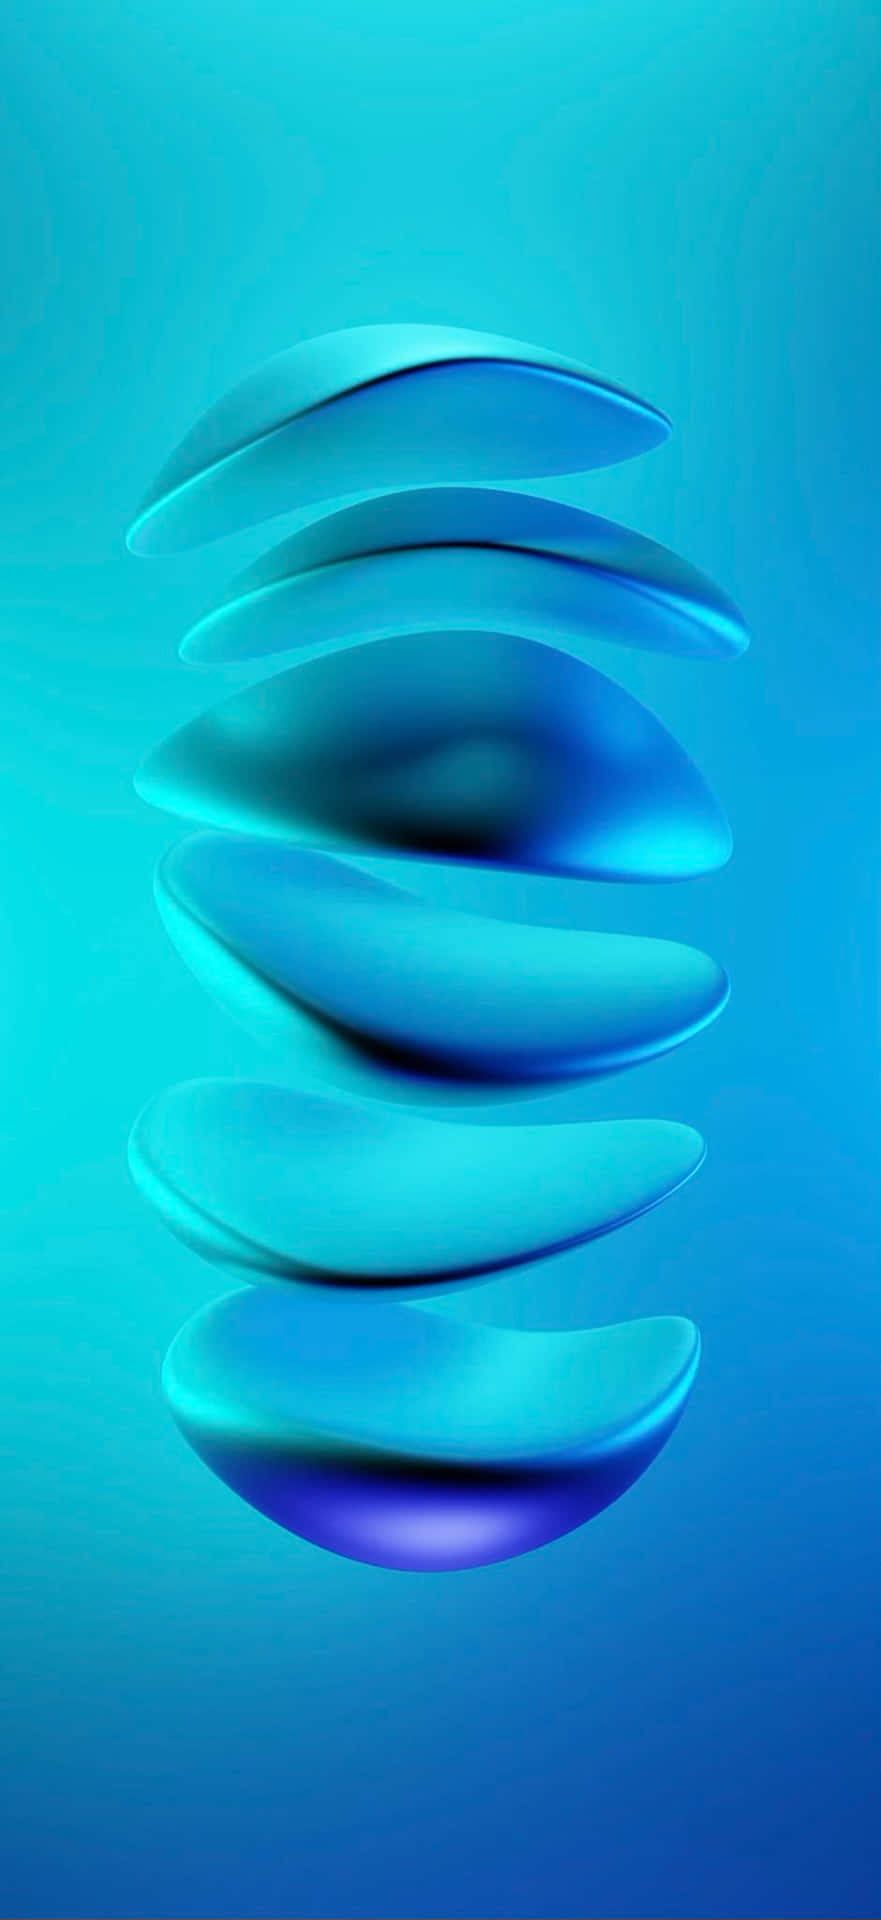 A Blue Abstract Background With A Blue Sphere Wallpaper